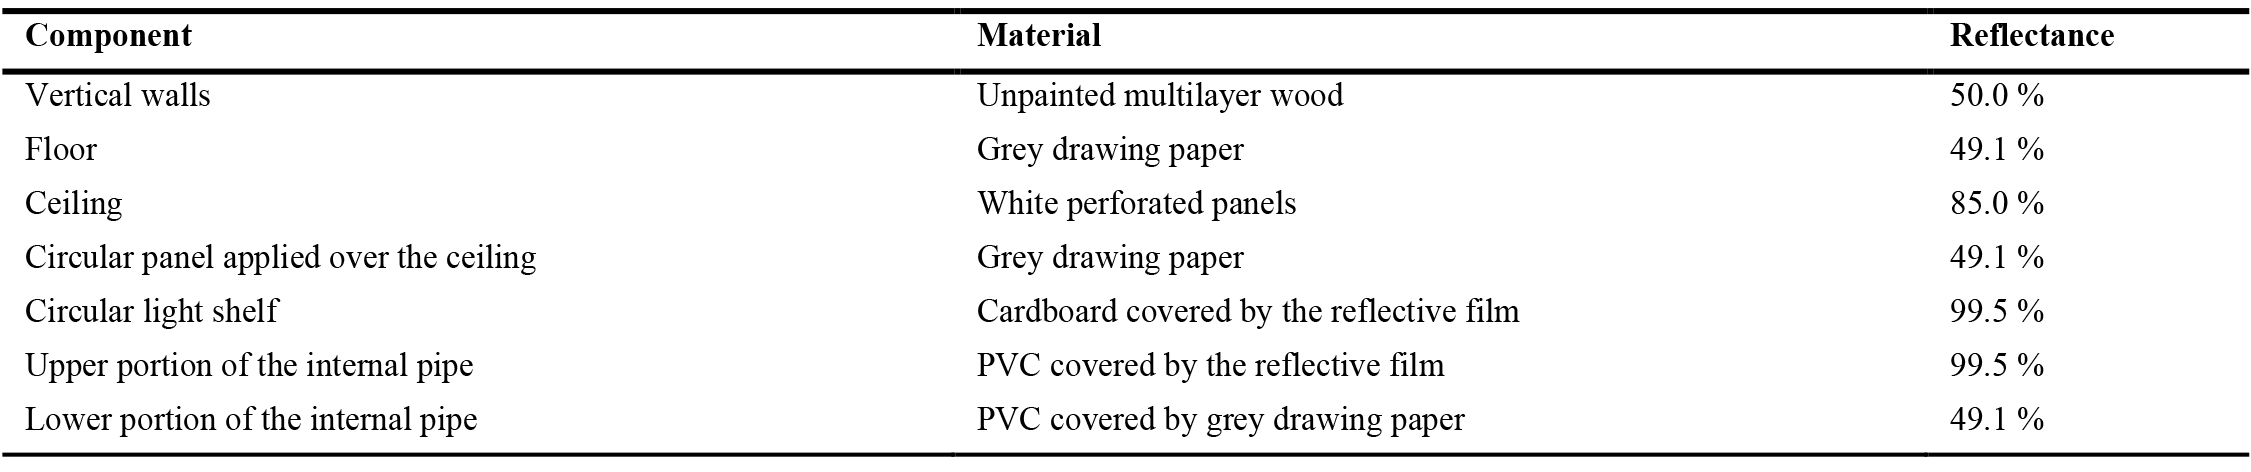 Optical properties of common material surfaces used in daylighting simulations.